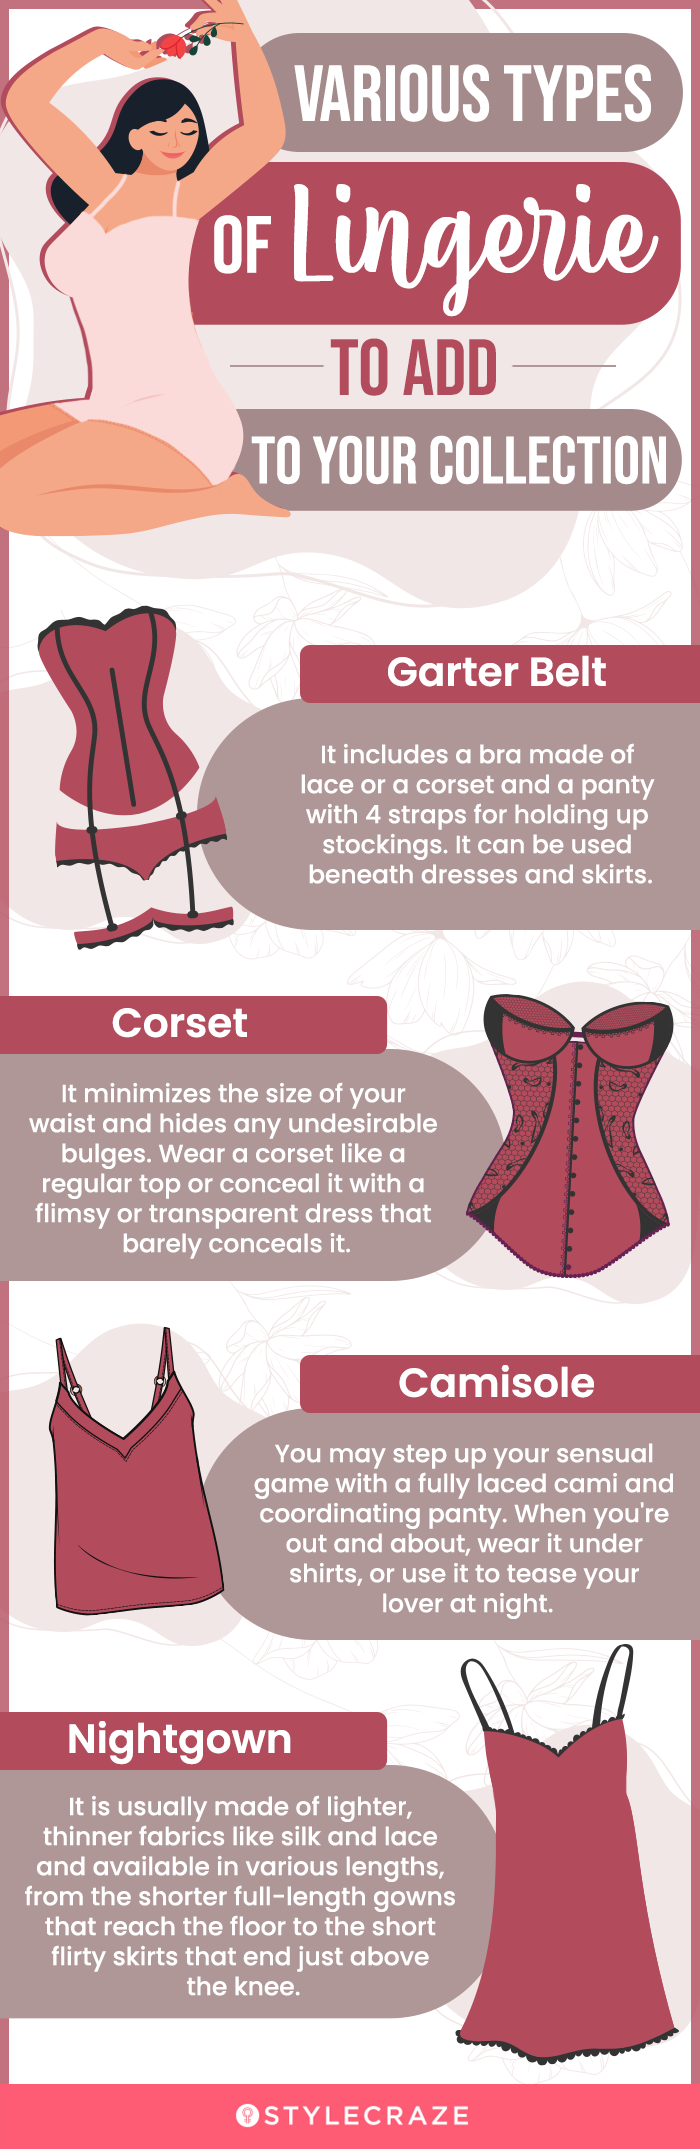 Types of Bra Designs - Sweet Skin Liners  Fashion vocabulary, Bra types,  Fashion terms